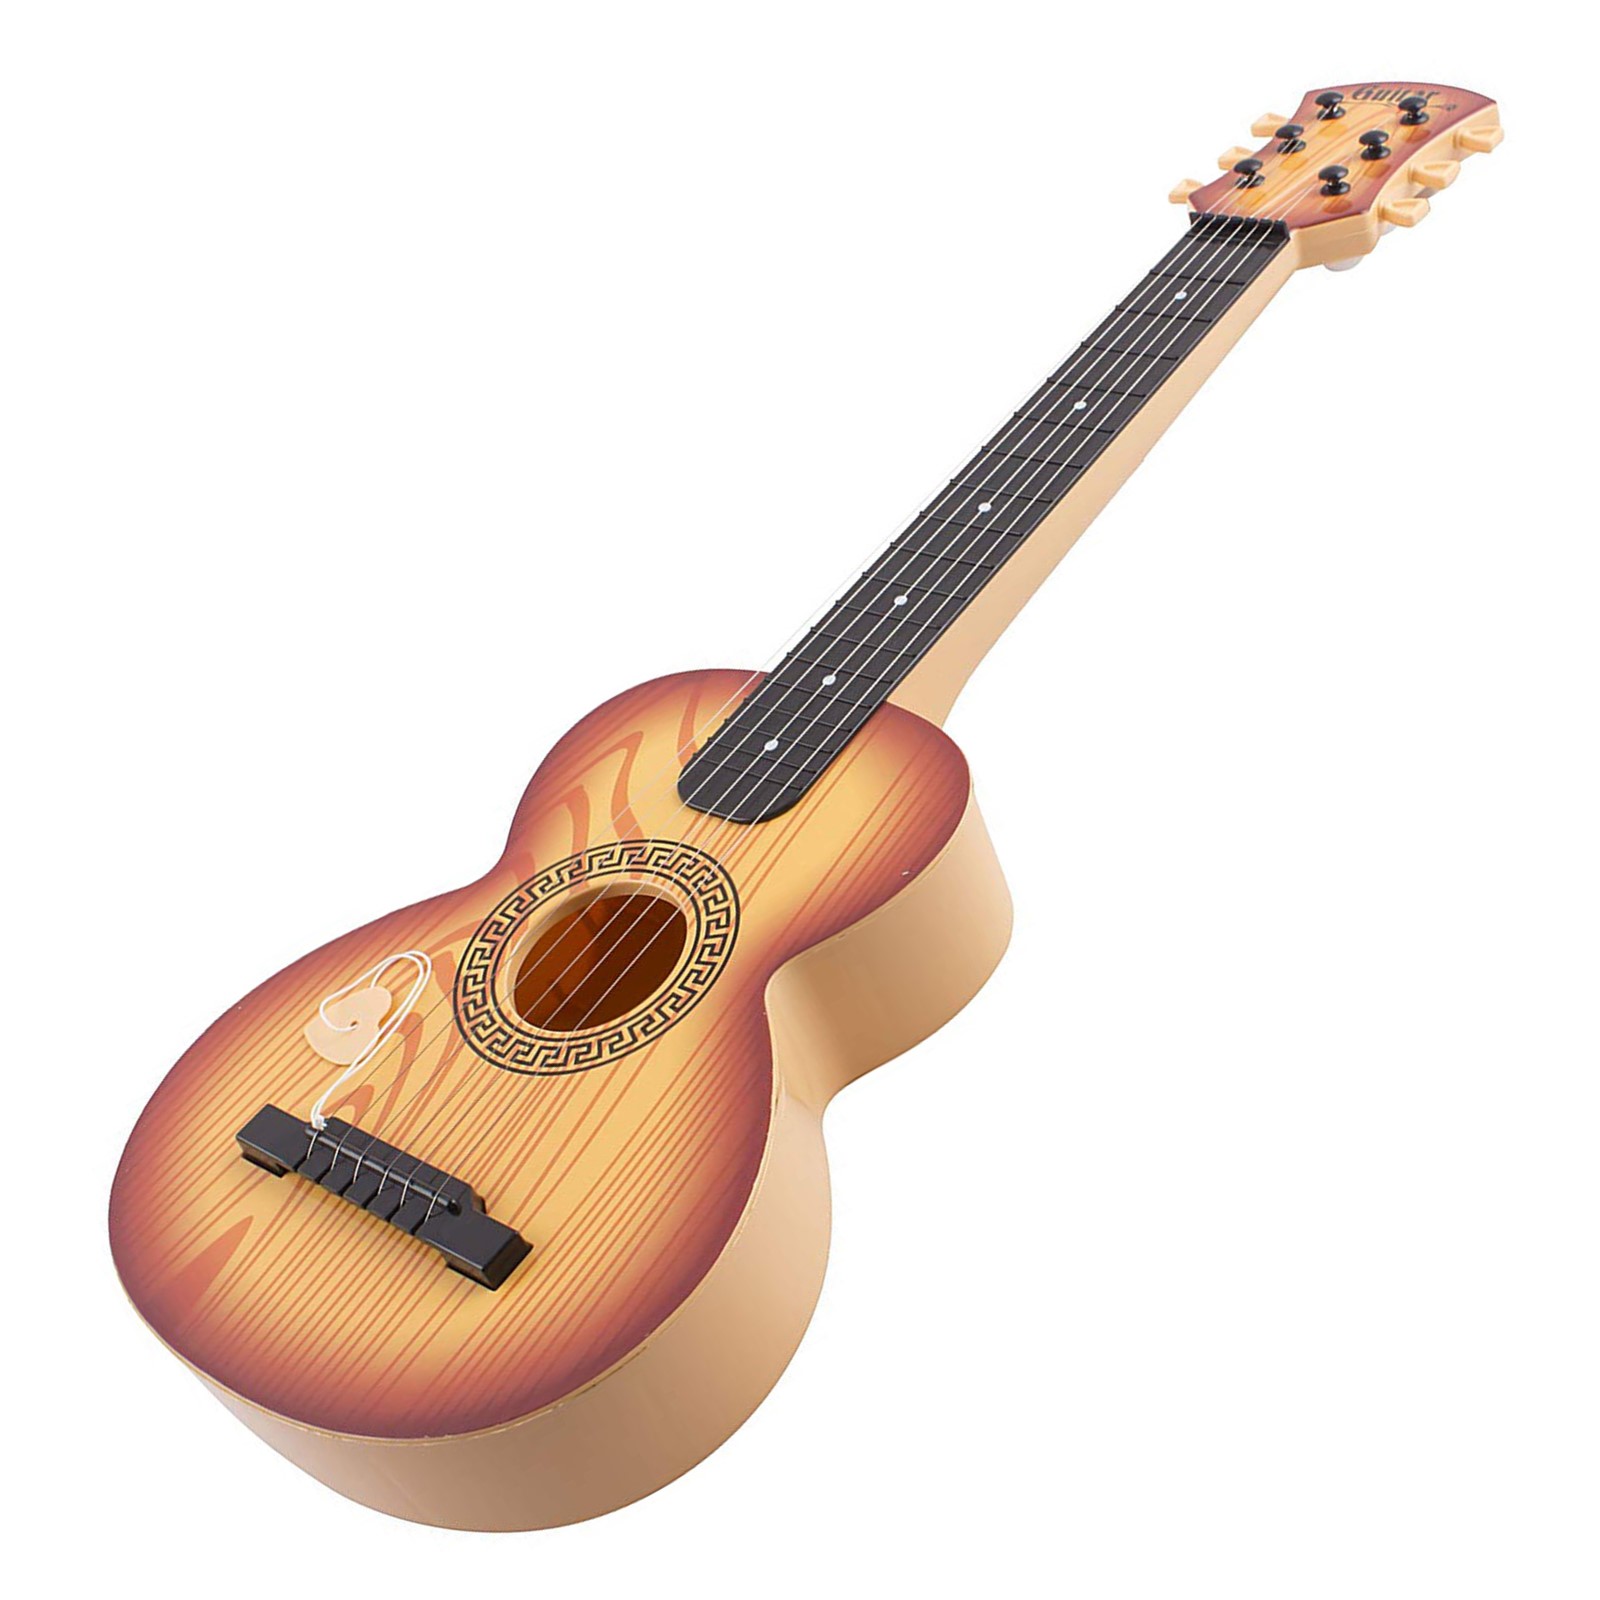 Toy Guitar Rock Star 6 String Acoustic Kids 25.5\" Ukulele With Guitar Pick Children\'s Musical Instrument Vibrant Sound And Color Tunable Perfect For Learning How To Play Educational Light Brown